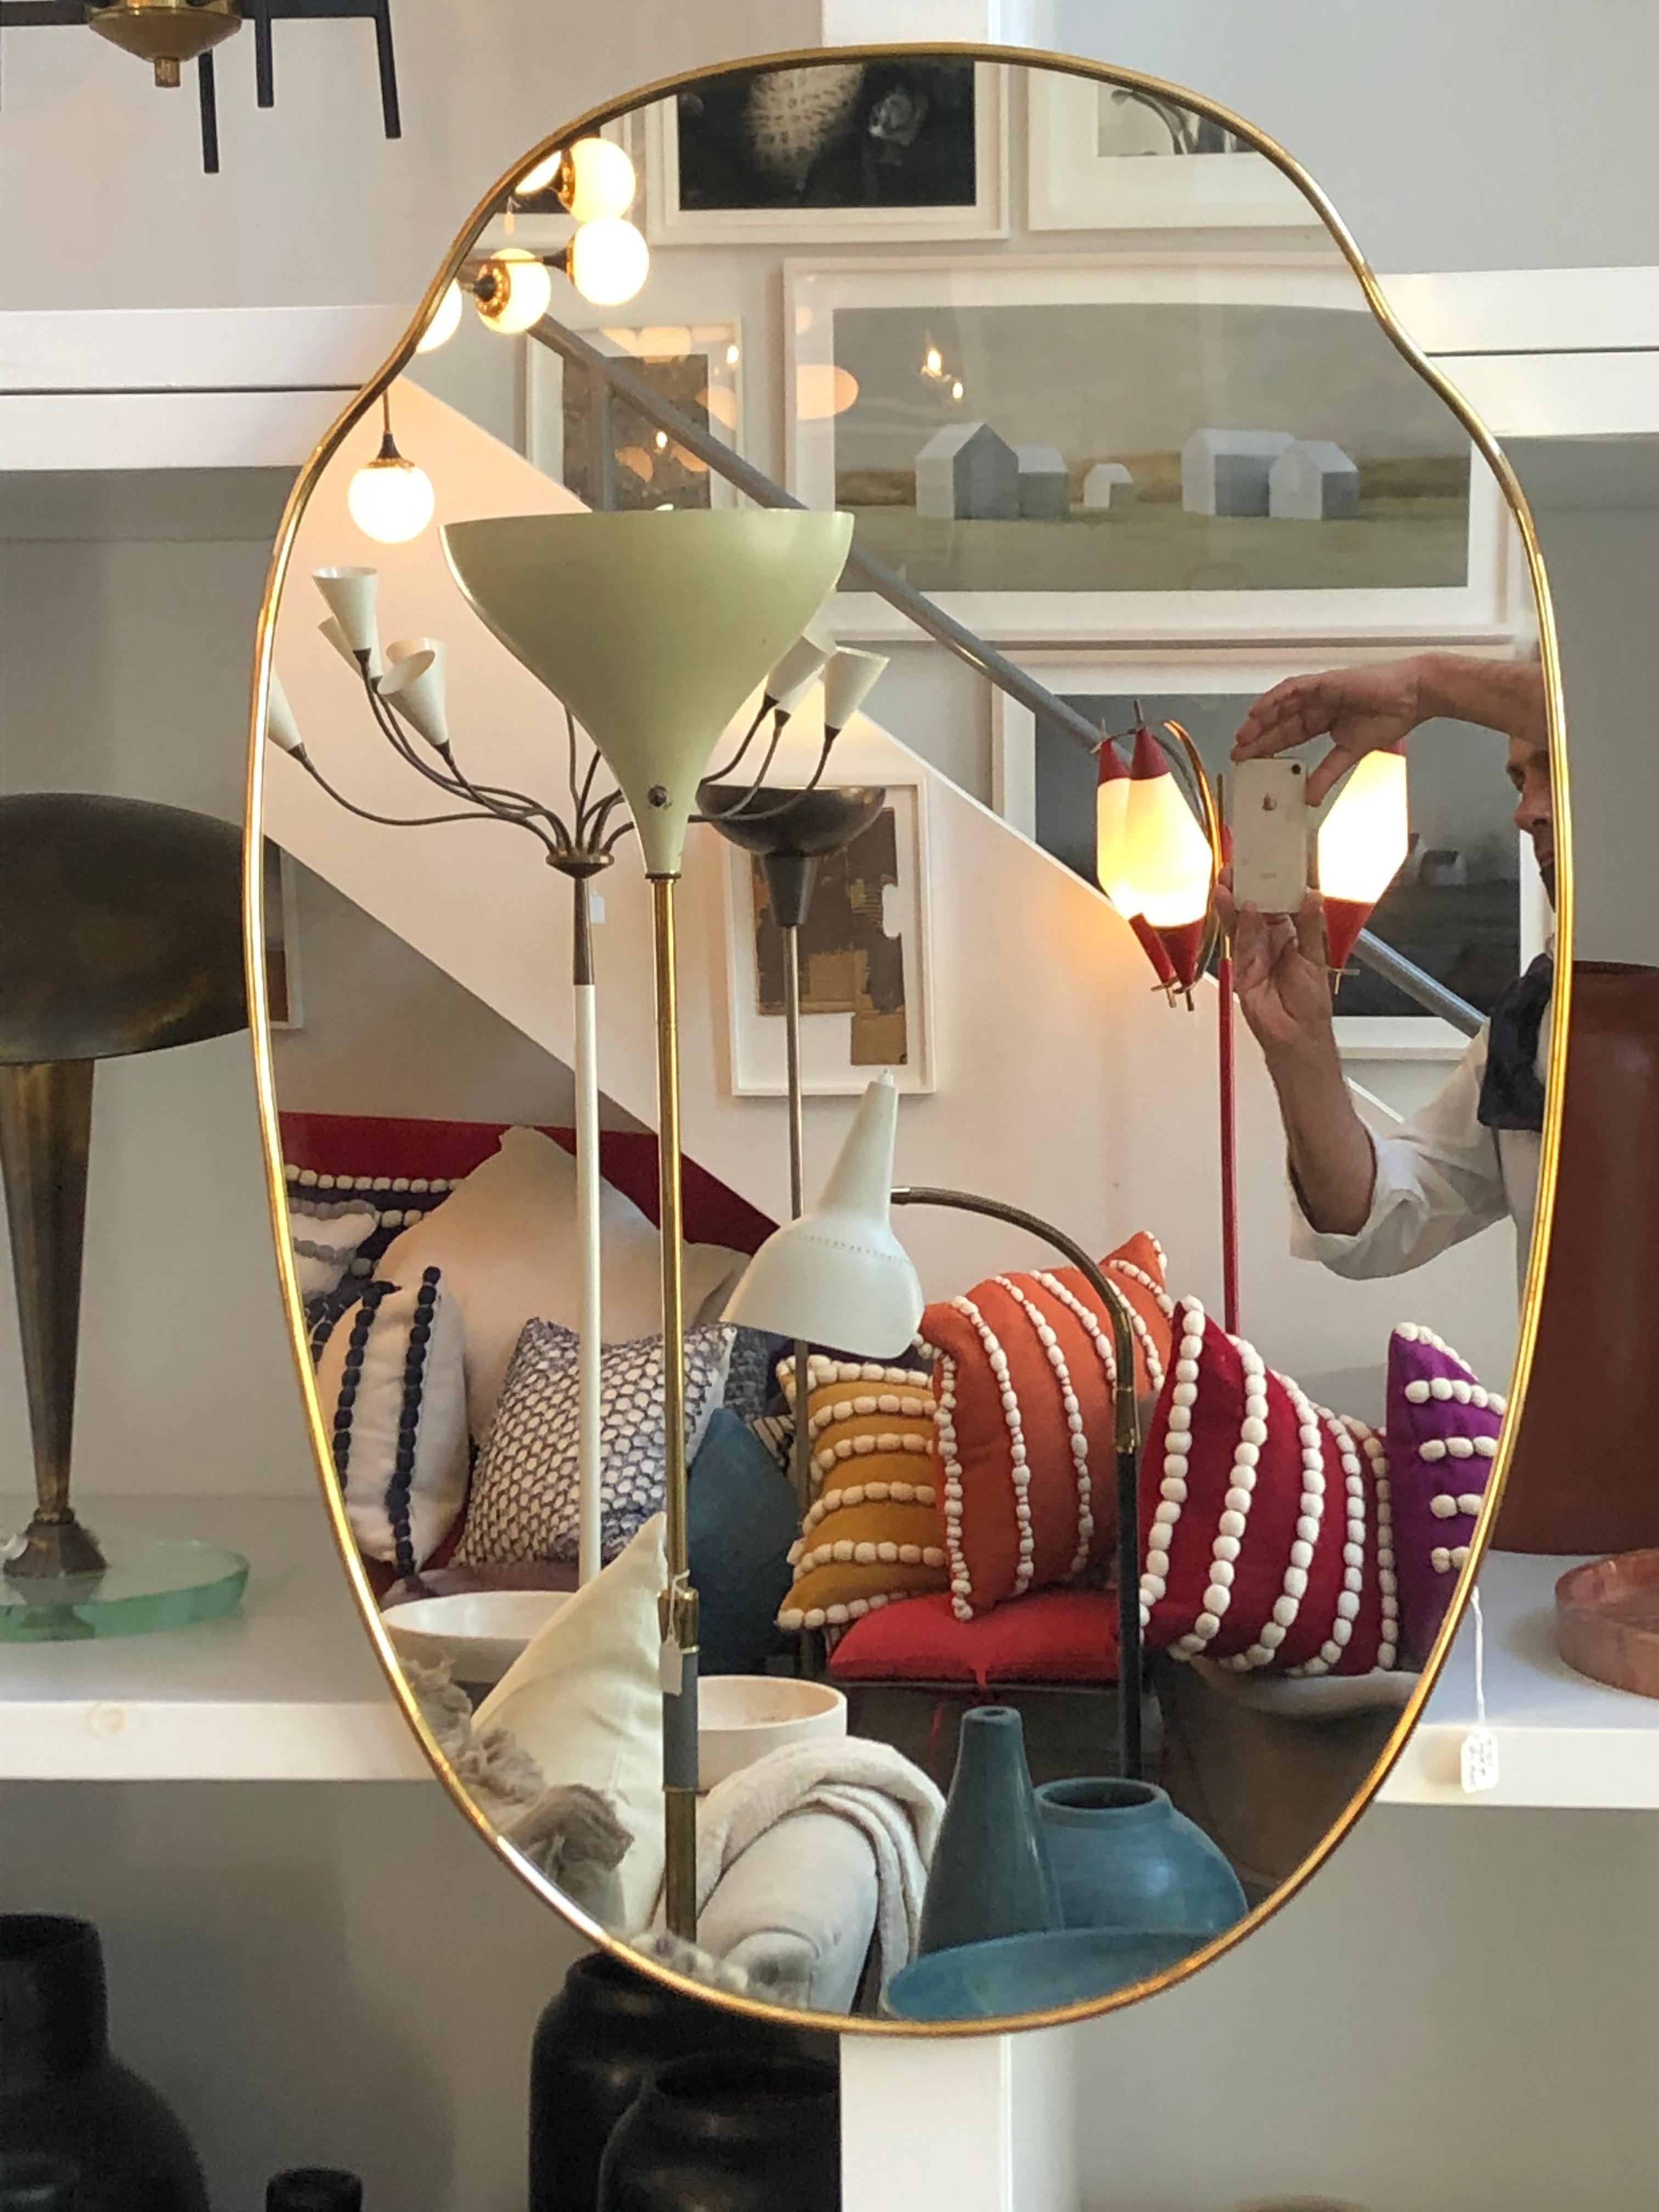 Italian brass mirror by Le Lampade.
1950s Italian Gio Ponti style.
This mirror can be custom made and several finishes are available.